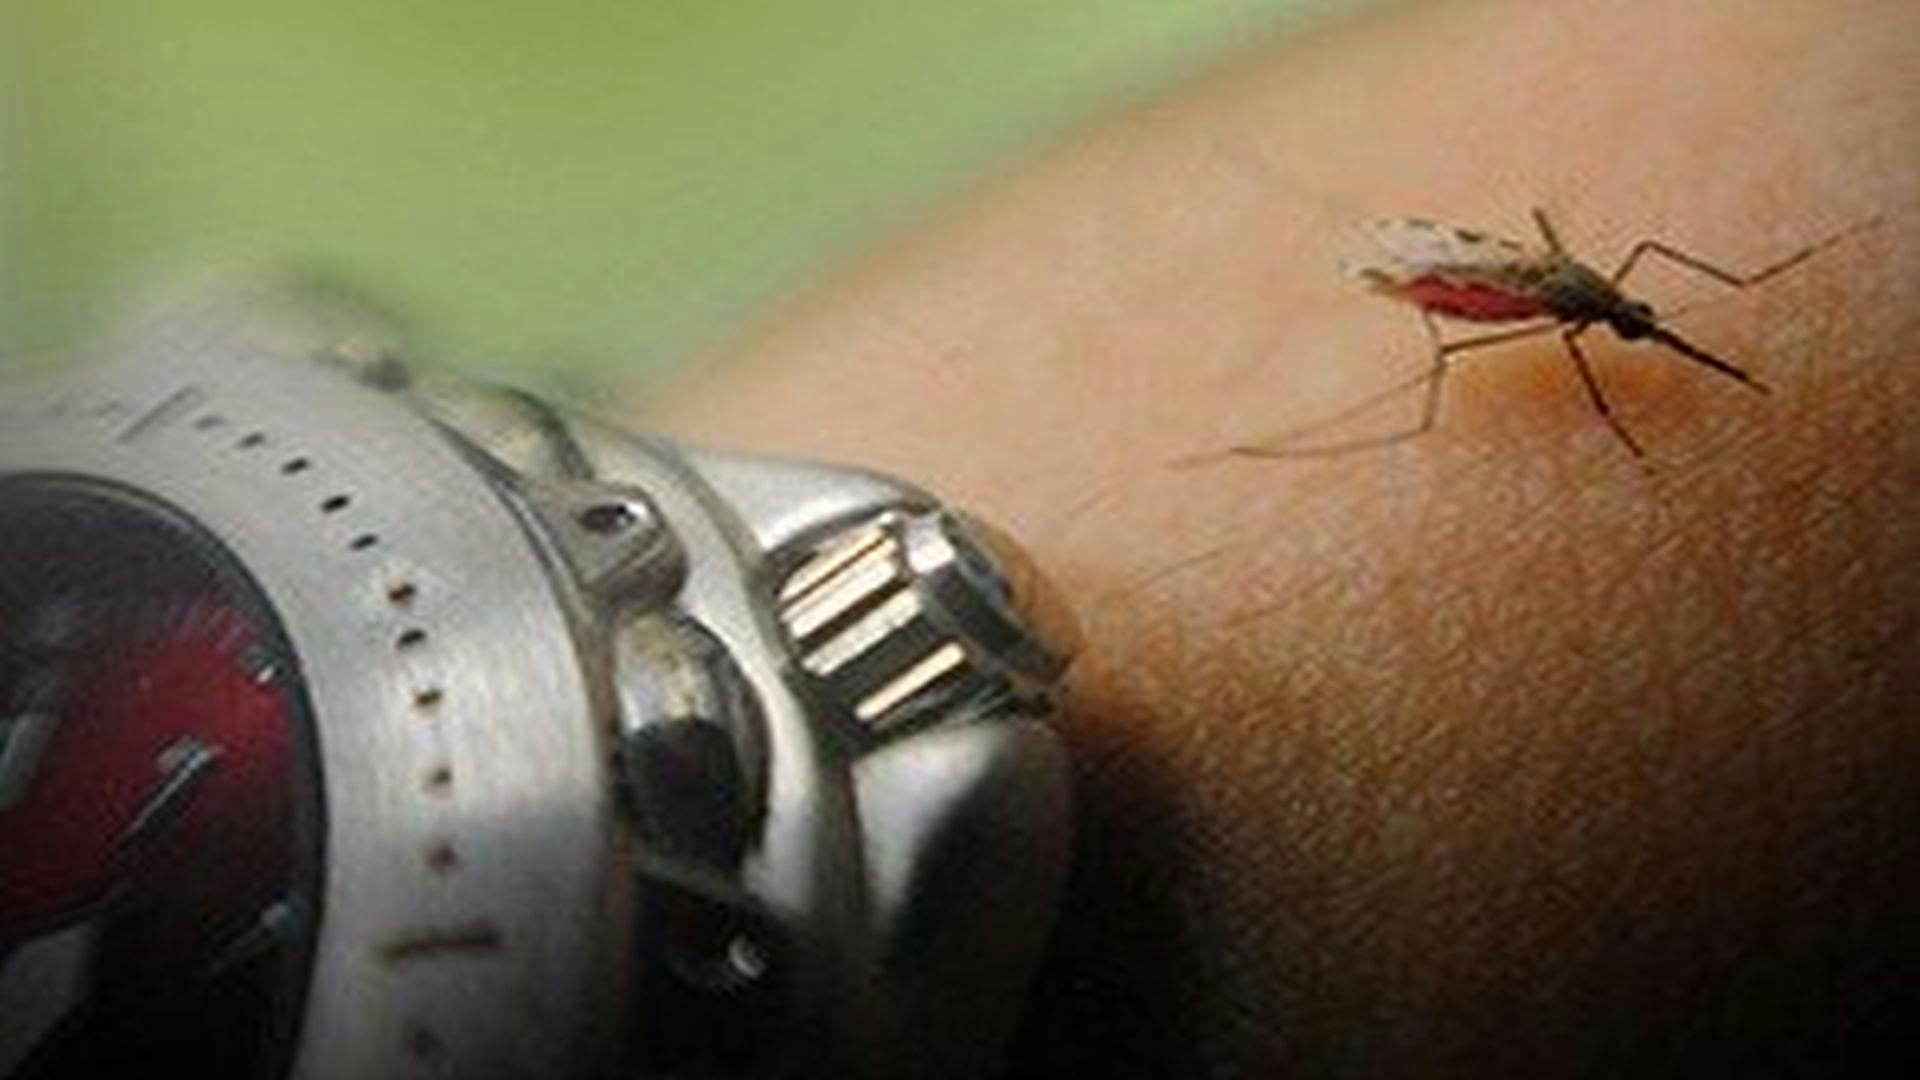 Researchers Use Light to Manipulate Mosquitoes